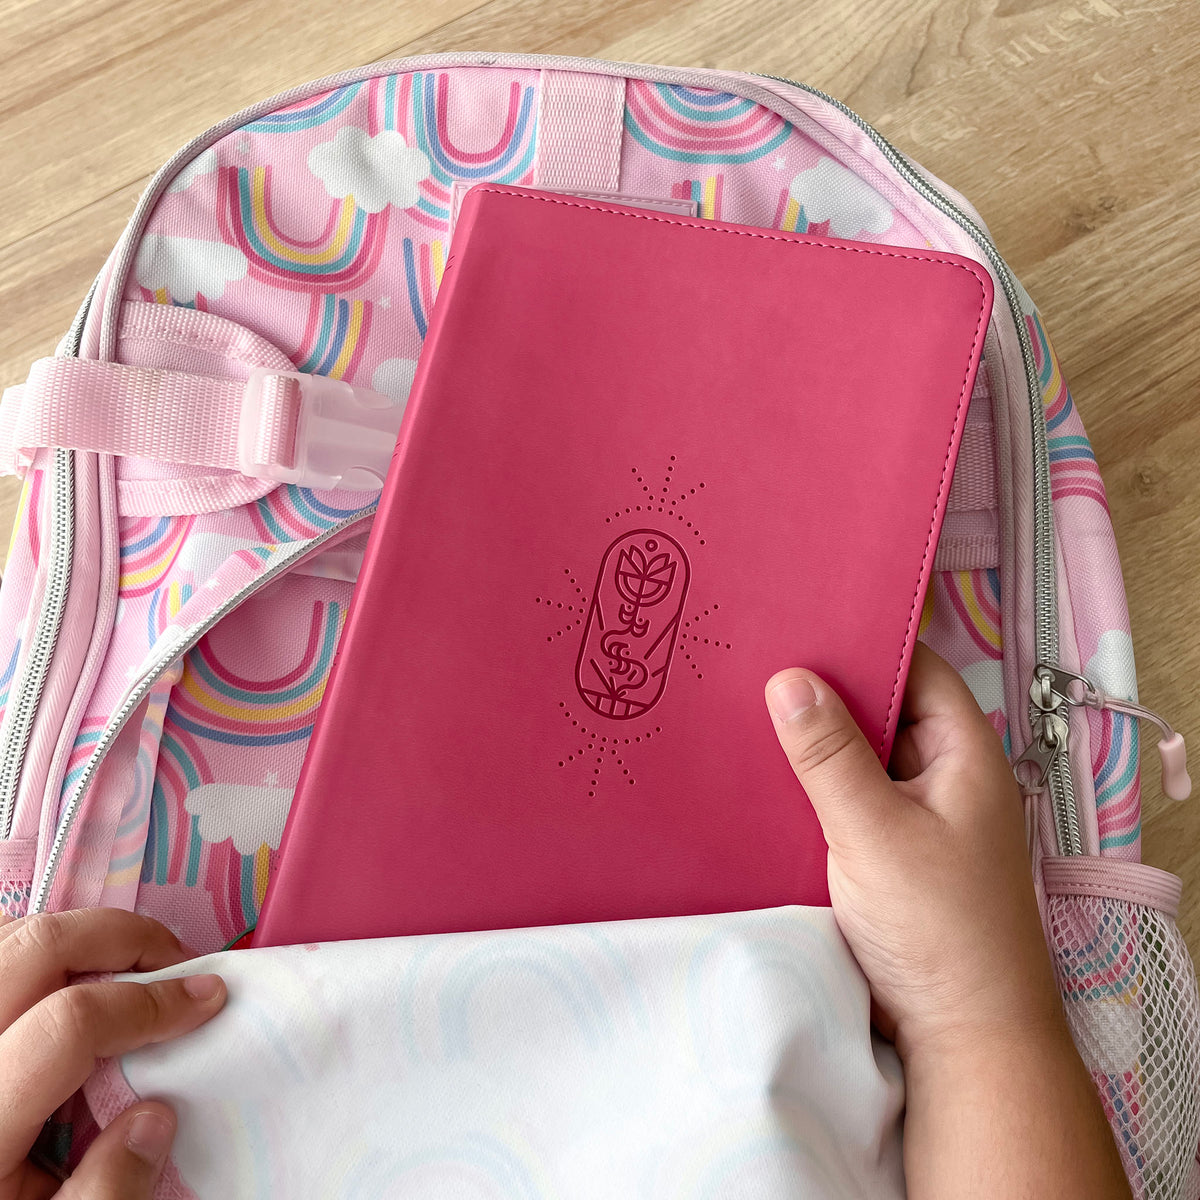 ESV Berry Kids Bible with Back pack